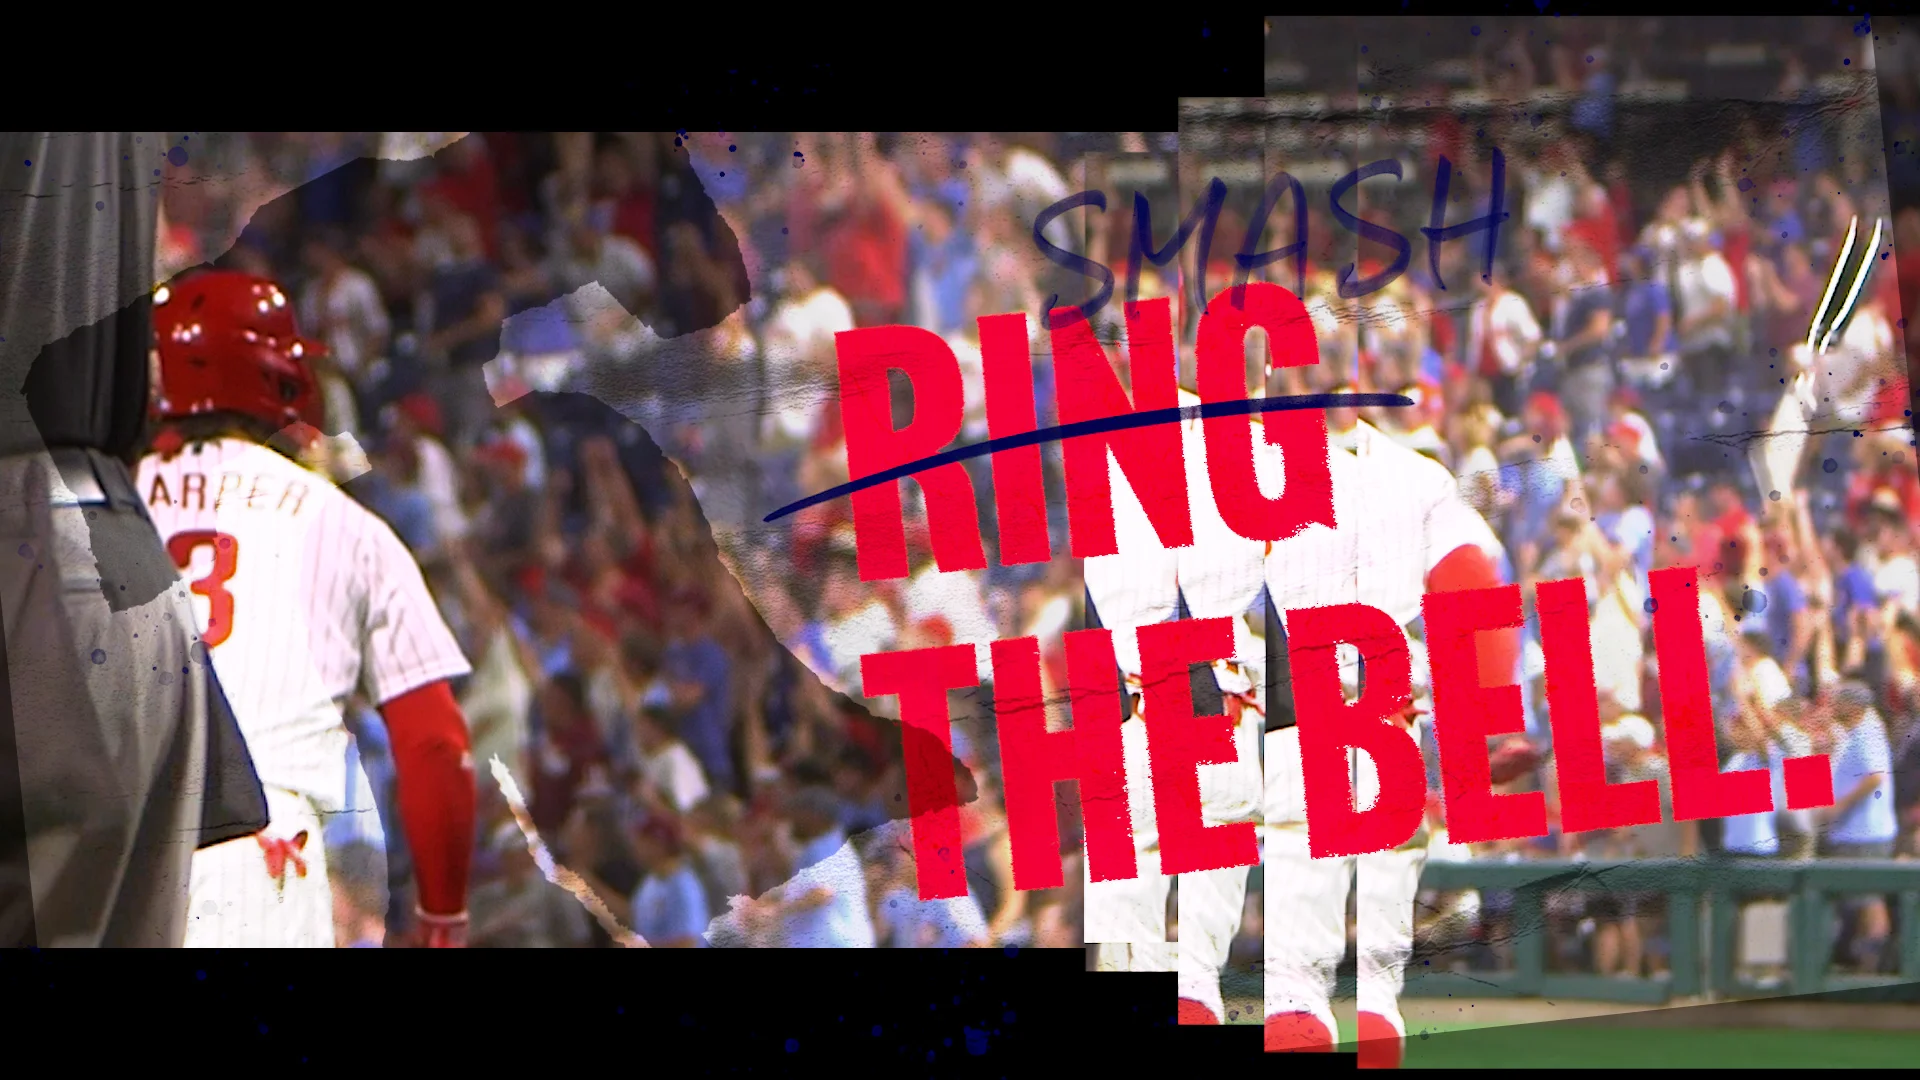 Smash The Bell: The Phillies official hype video to set the tone